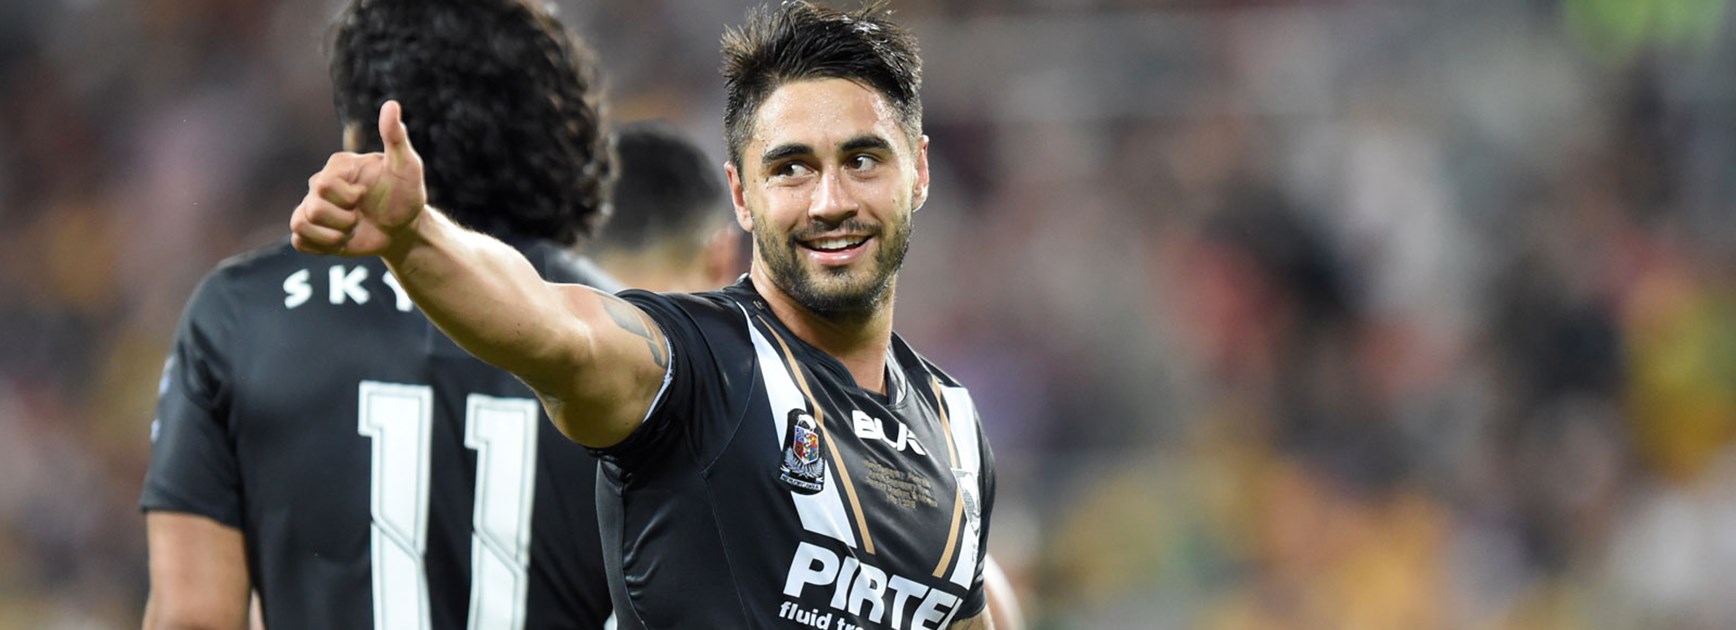 Shaun Johnson returned to form as the Kiwis defeated the Kangaroos in the 2015 Anzac Test.